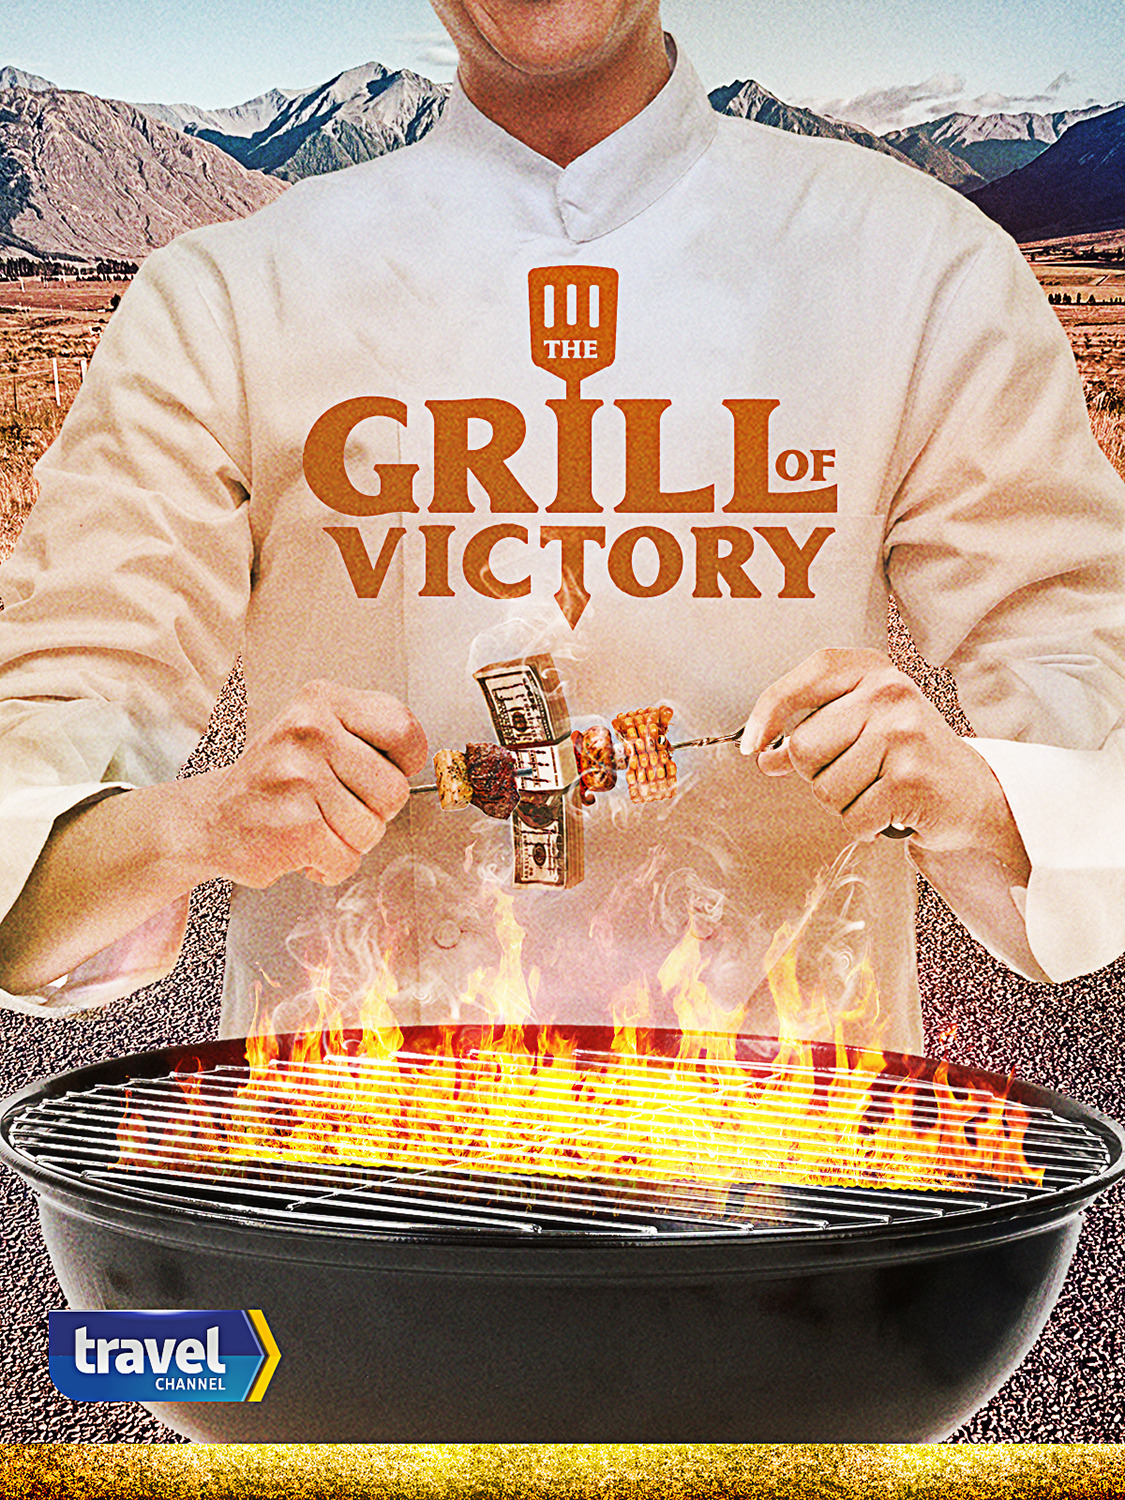 Extra Large TV Poster Image for The Grill of Victory 